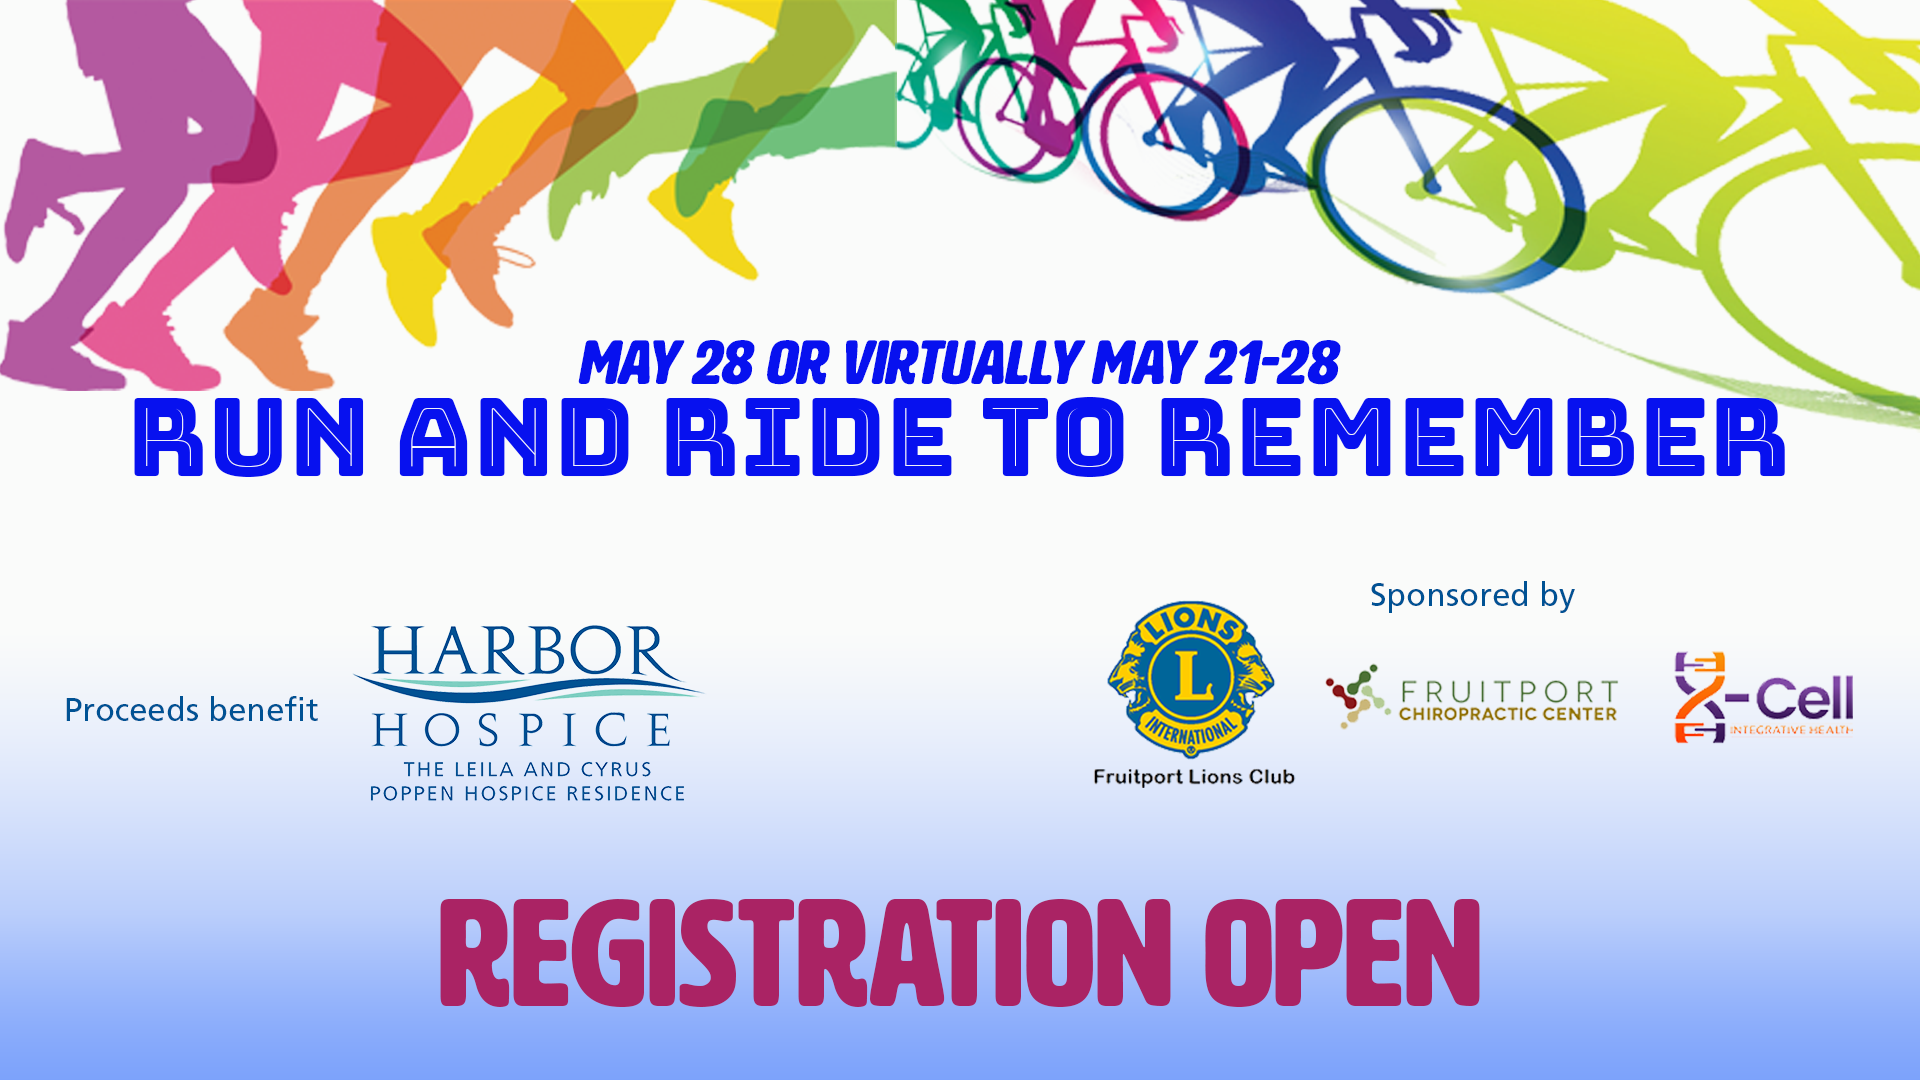 Event Run and Ride To Remember - Run and Ride to Remember to benefit Poppen Hospice Residence